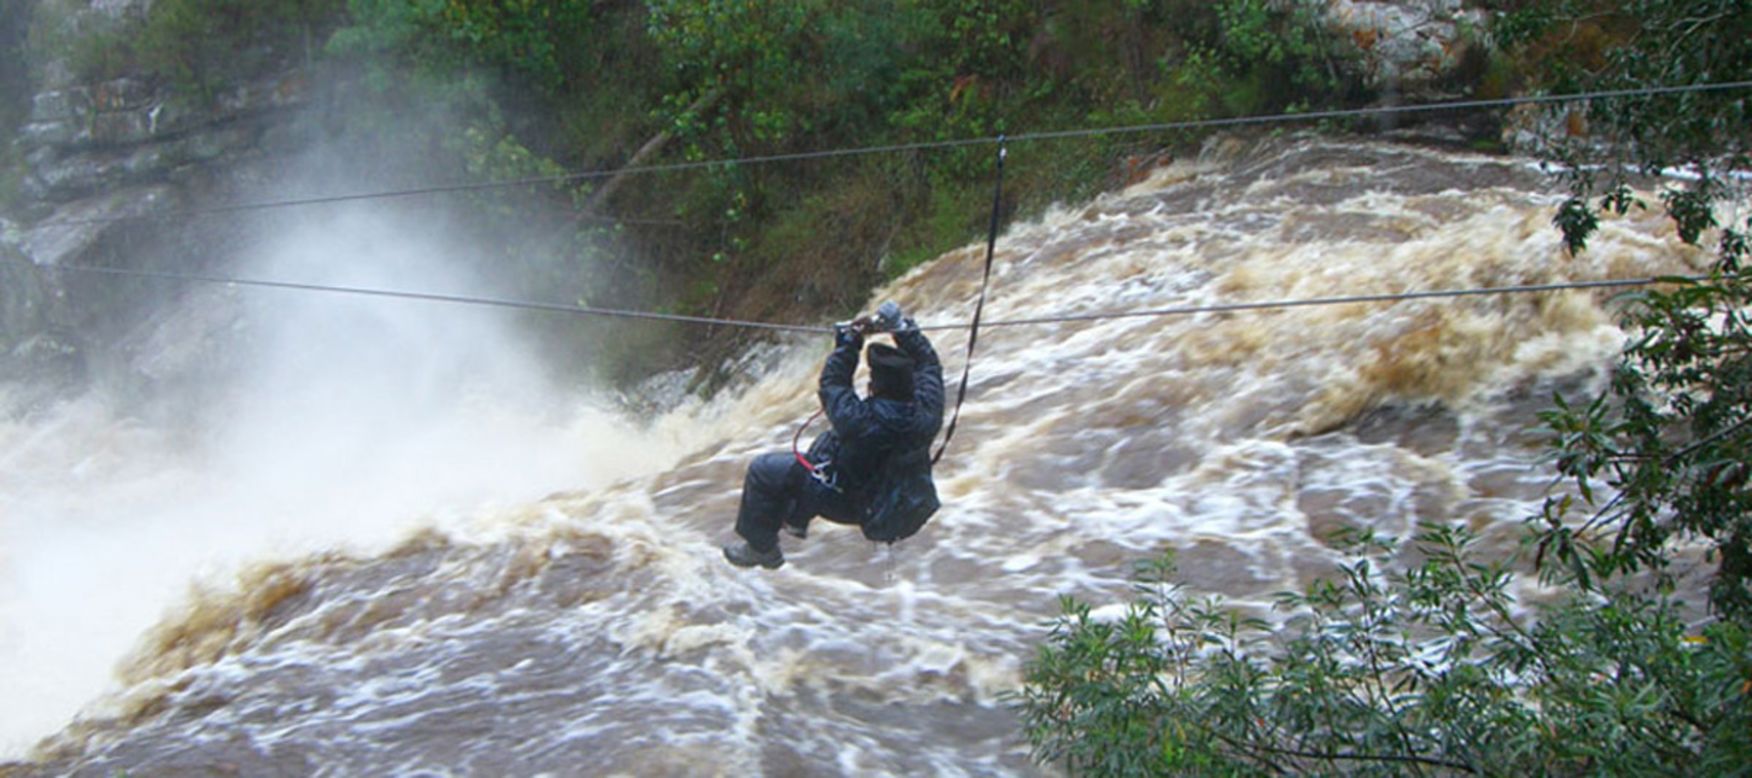 Zipline fliers can control their speed as they hurtle through Tsitsikamma, a jumble of rainforest, rivers and rocky cliffs along South Africa's Garden Route.